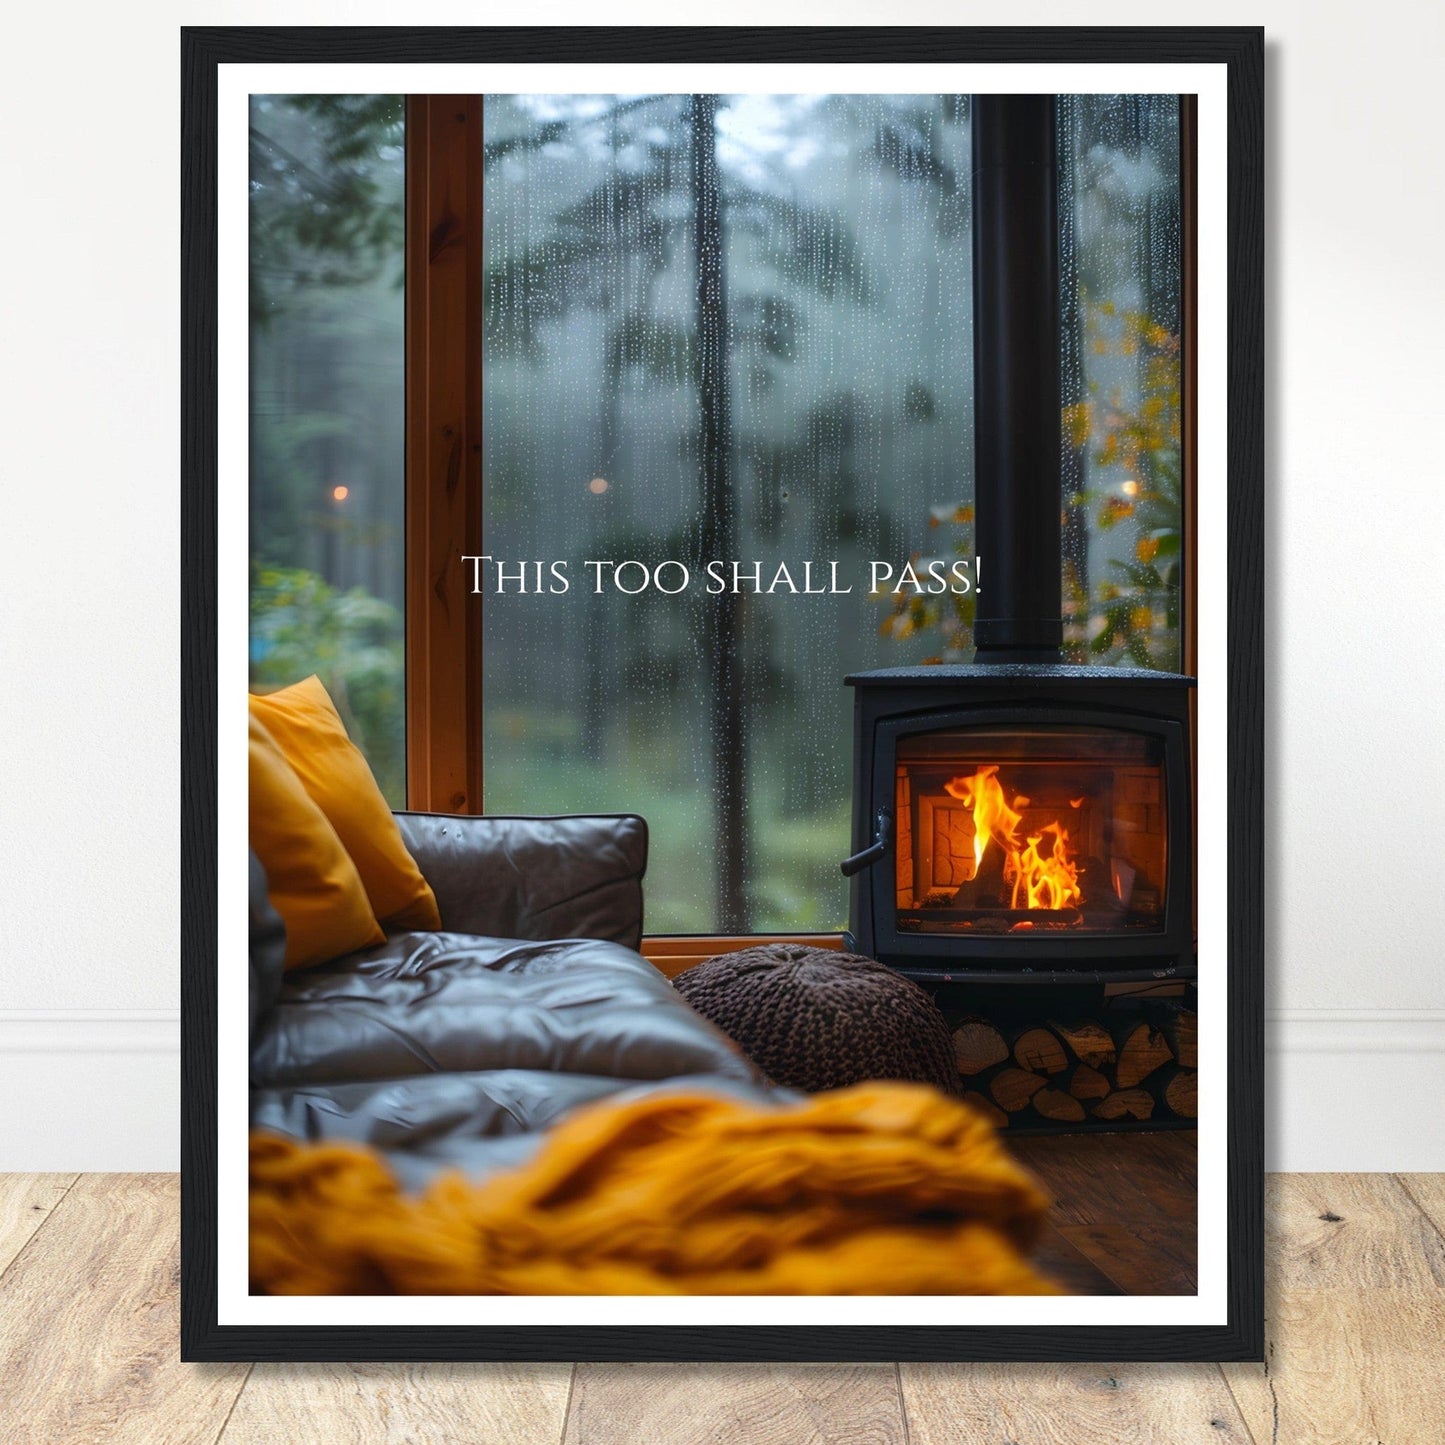 Coffee With My Father Print Material 40x50 cm / 16x20″ / Black frame This Too Shall Pass - Custom Art